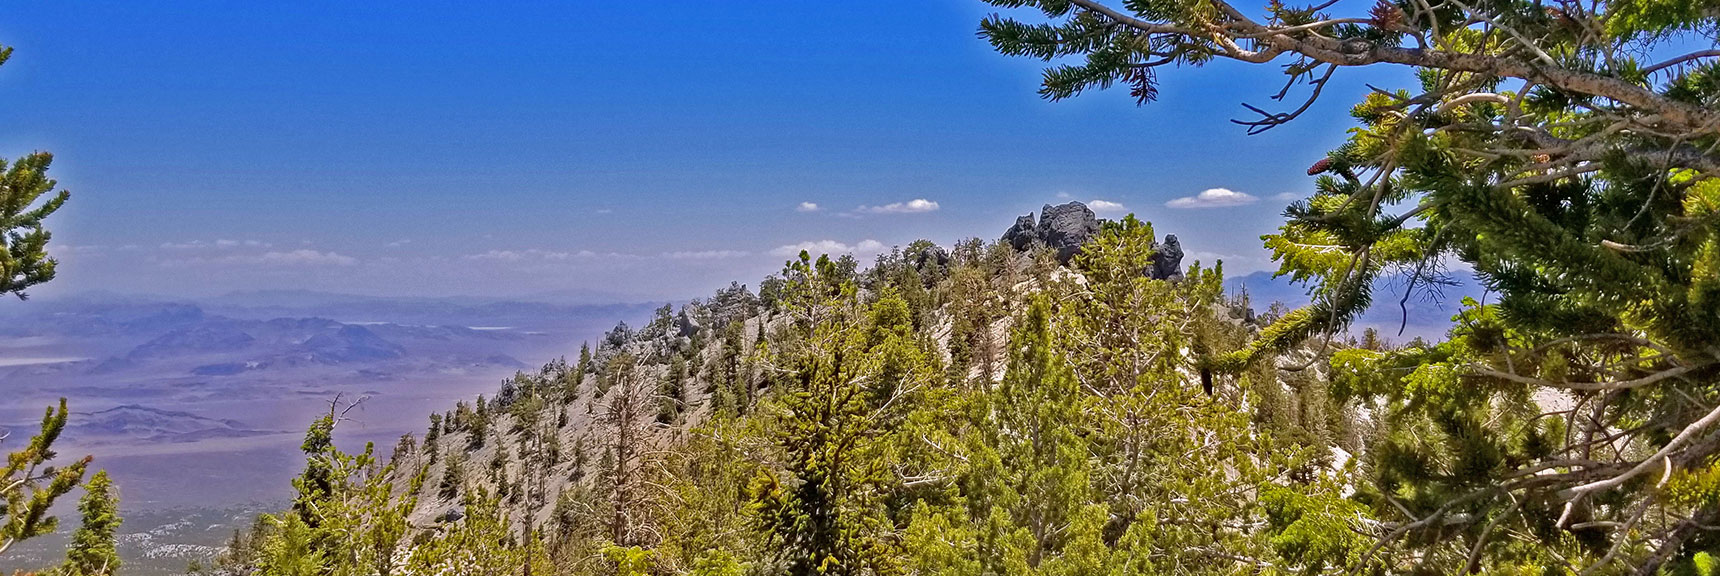 Black Rock Sister to the North Across the Upper Ridge Saddle | Black Rock Sister | Mt Charleston Wilderness | Lee Canyon | Spring Mountains, Nevada